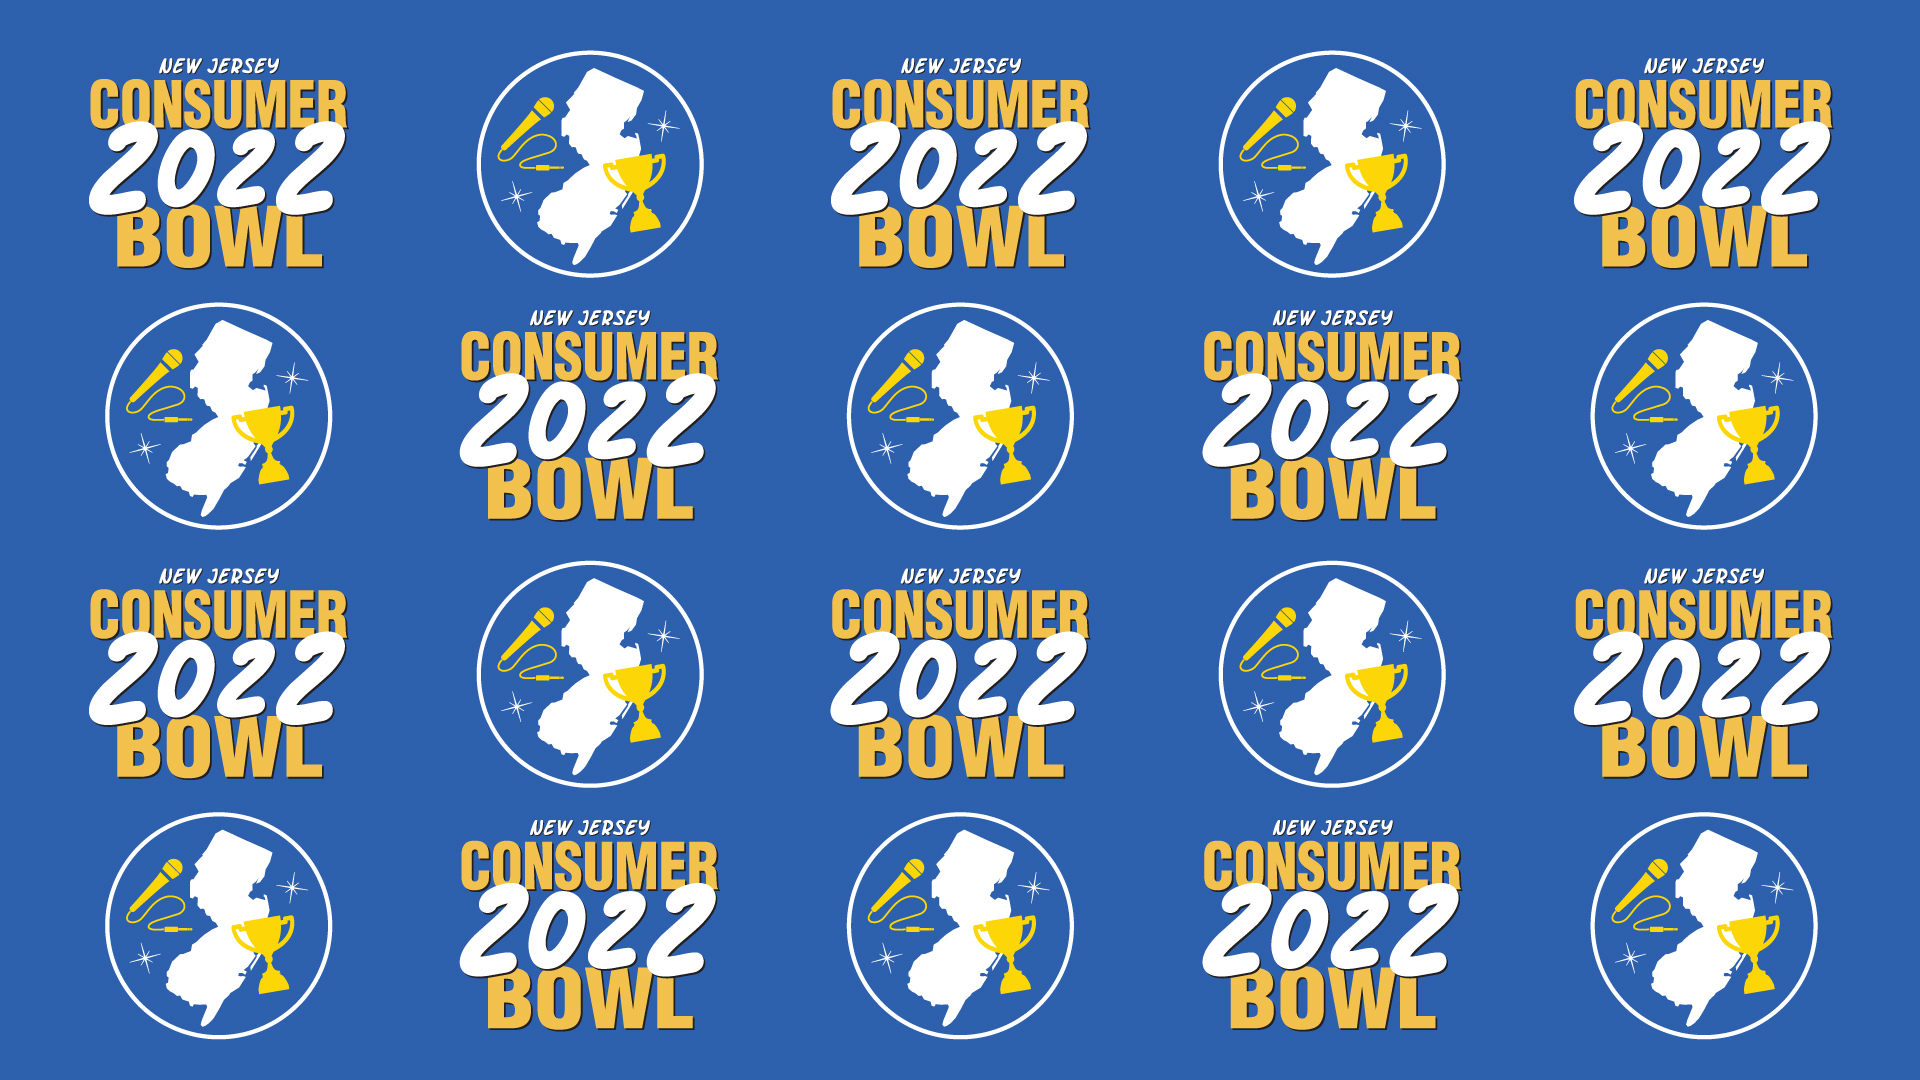 Hightstown High continues Consumer Bowl dominance